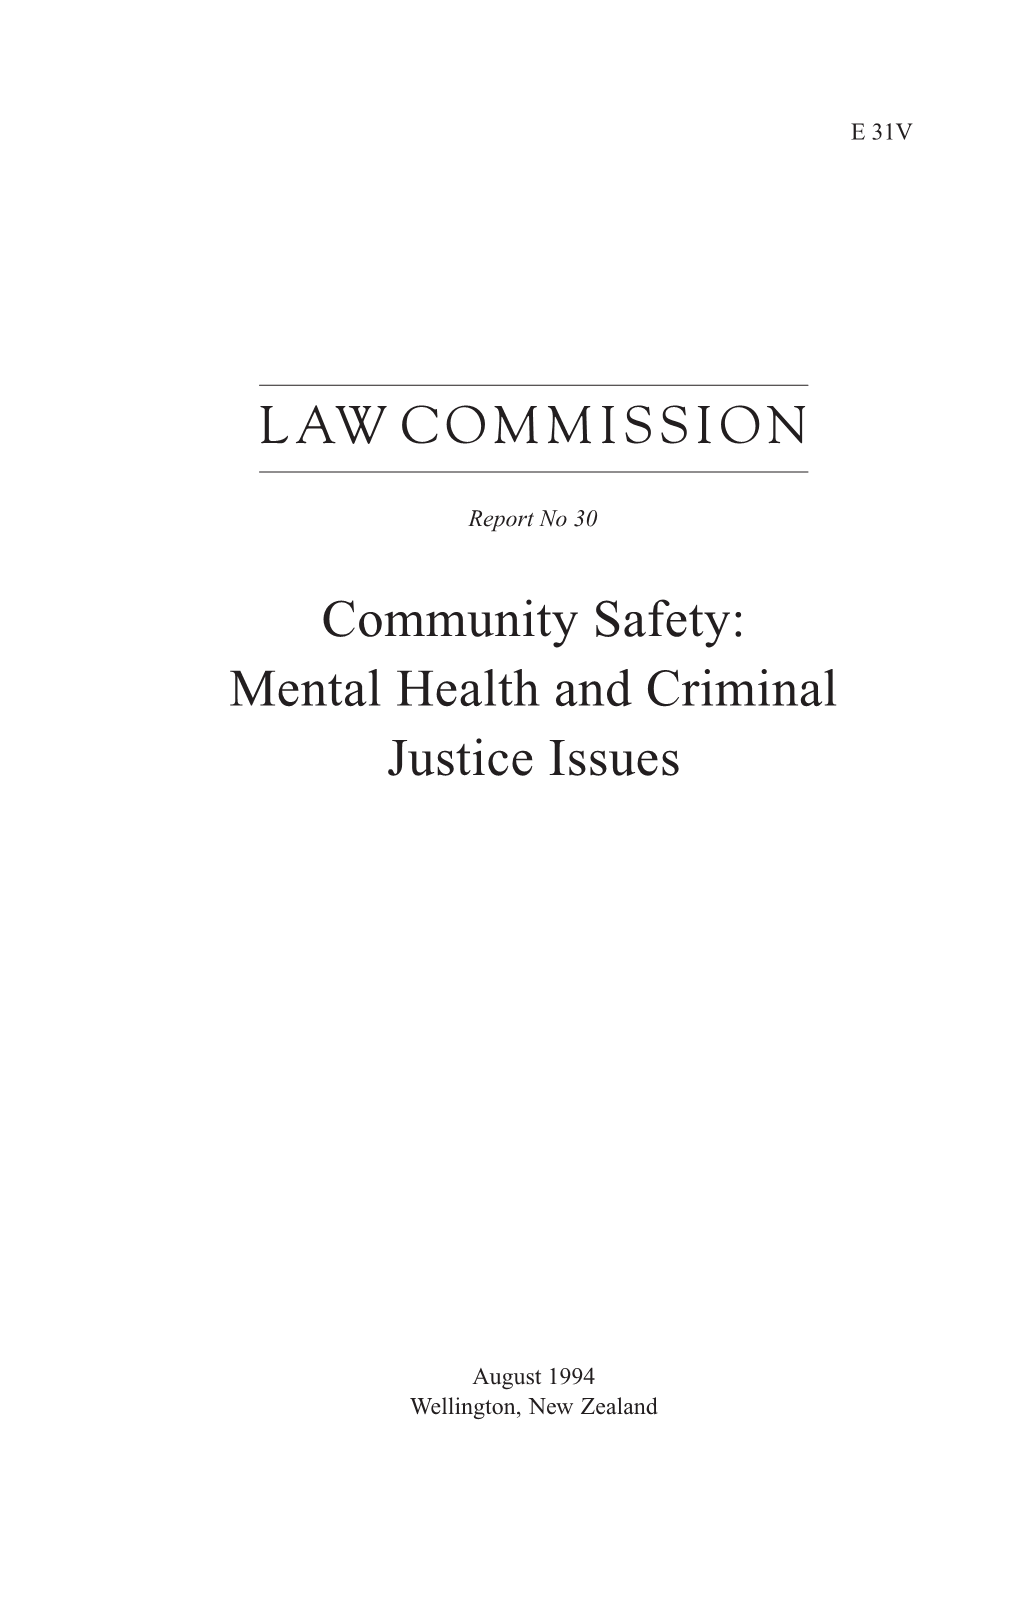 Community Safety : Mental Health and Criminal Justice Issues